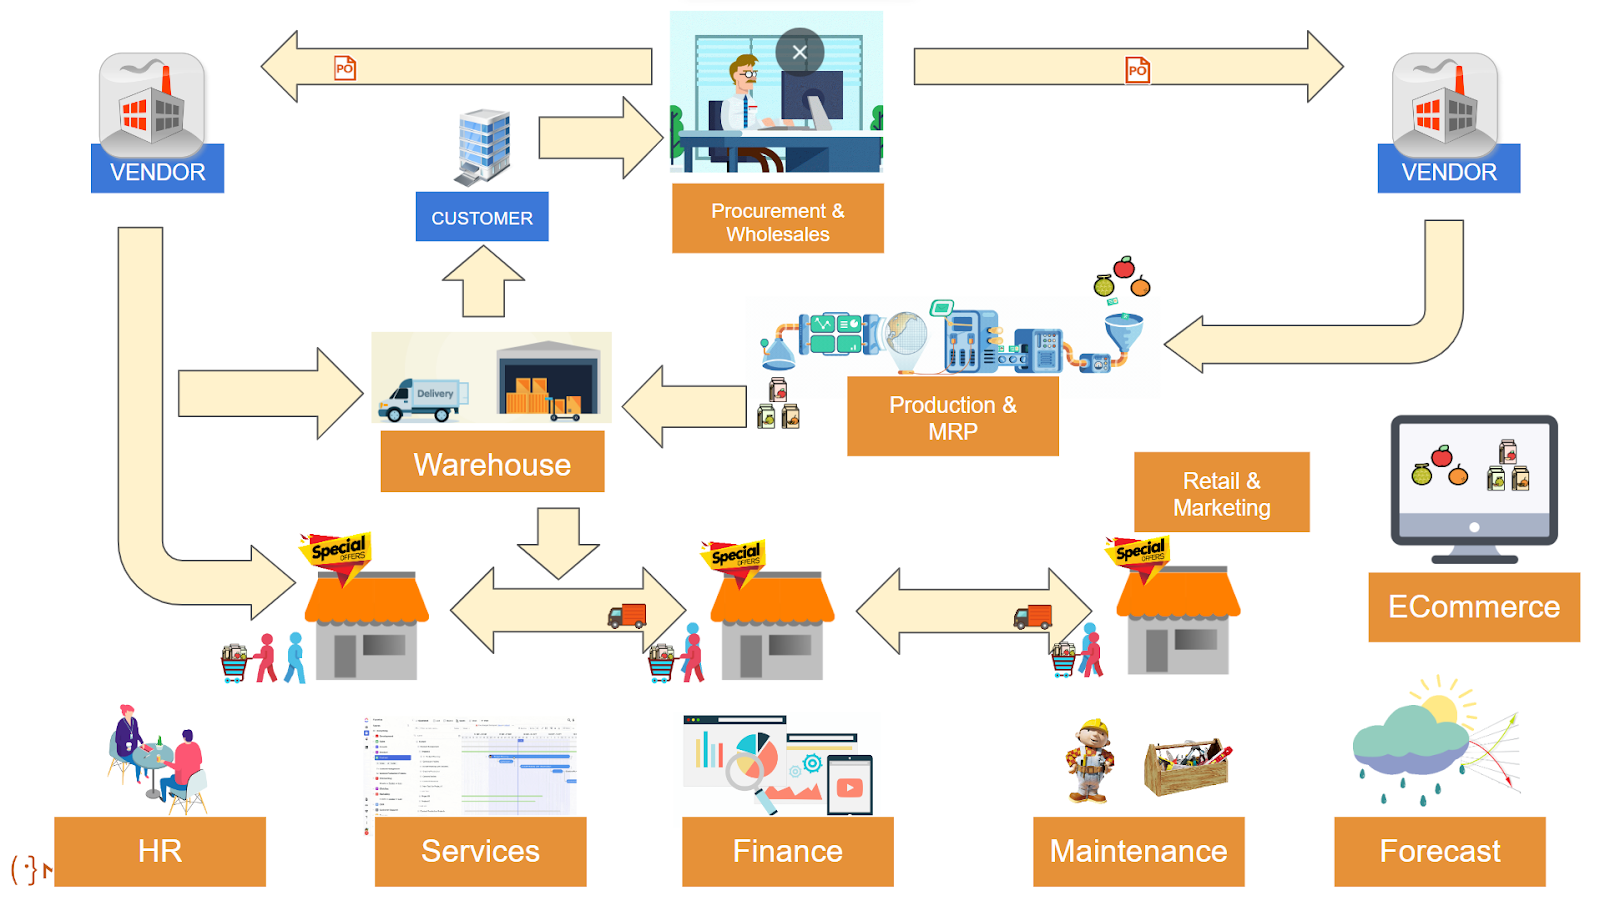 A detailed flowchart representing MonsoonSIM's comprehensive business simulation process. The diagram illustrates the business cycle starting from 'Vendor' to 'Customer,' passing through 'Procurement & Wholesales,' 'Warehouse,' 'Production & MRP,' and 'Retail & Marketing,' finally linking back to 'Vendor.' The flow also incorporates other critical business areas such as 'HR,' 'Services,' 'Finance,' 'Maintenance,' and 'Forecast,' each with representative icons. 'ECommerce' is highlighted as an end-point, emphasizing the integration of online business operations. The flowchart visually demonstrates the interconnected nature of different business departments within a simulated environment